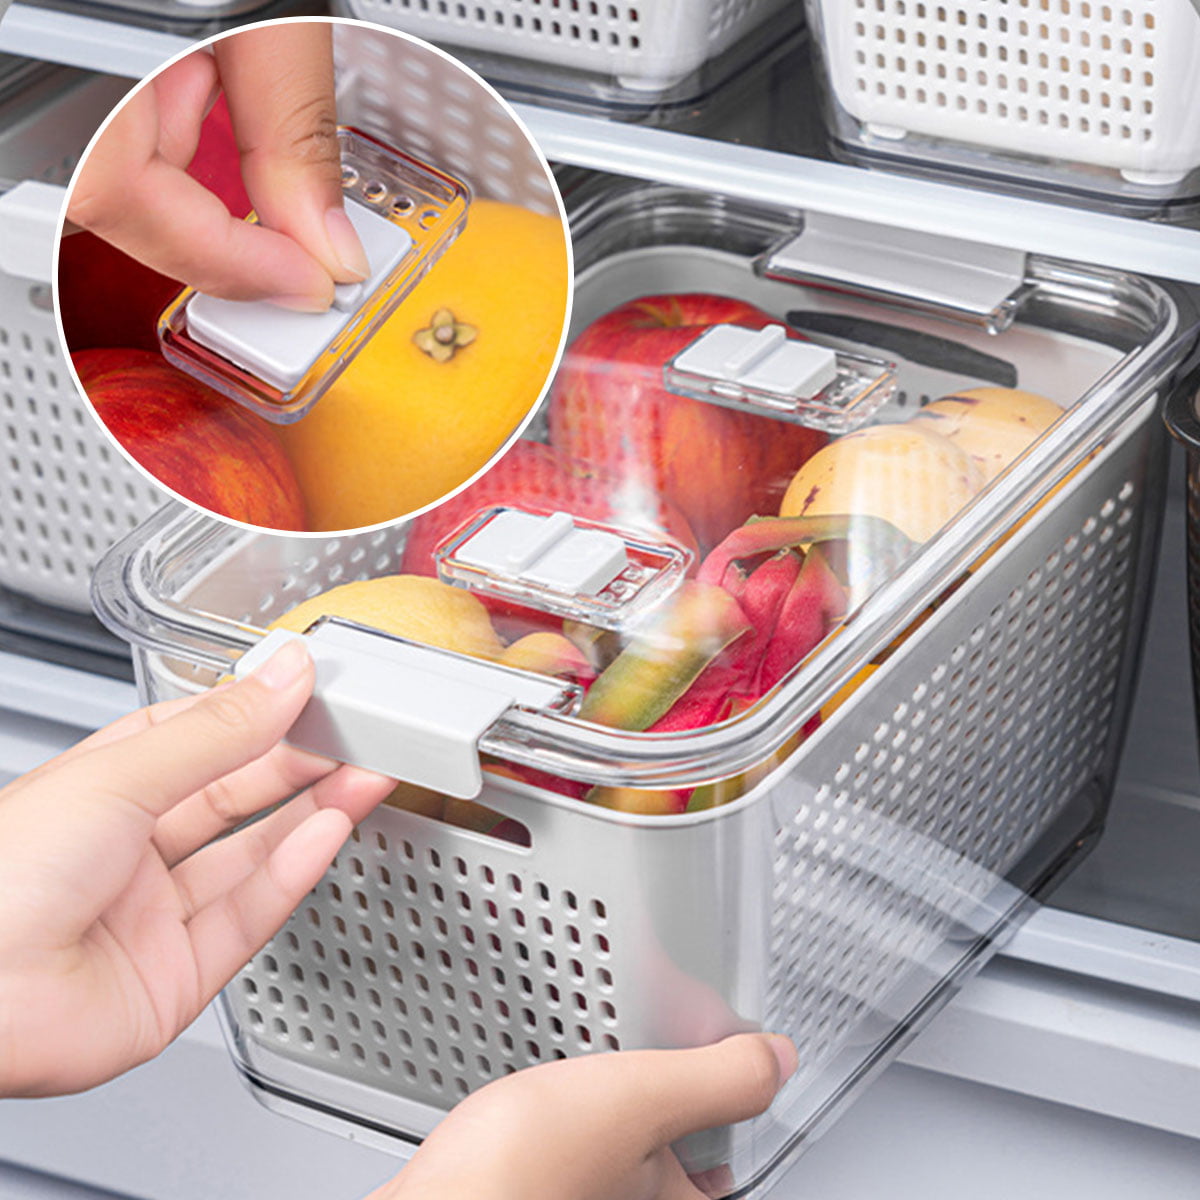 1pc 4-in-1 Multifunctional Fruit and Vegetable Storage Container with  Draining Crisper and Strainers - Keep Your Food Fresh and Organized in the  Kitch